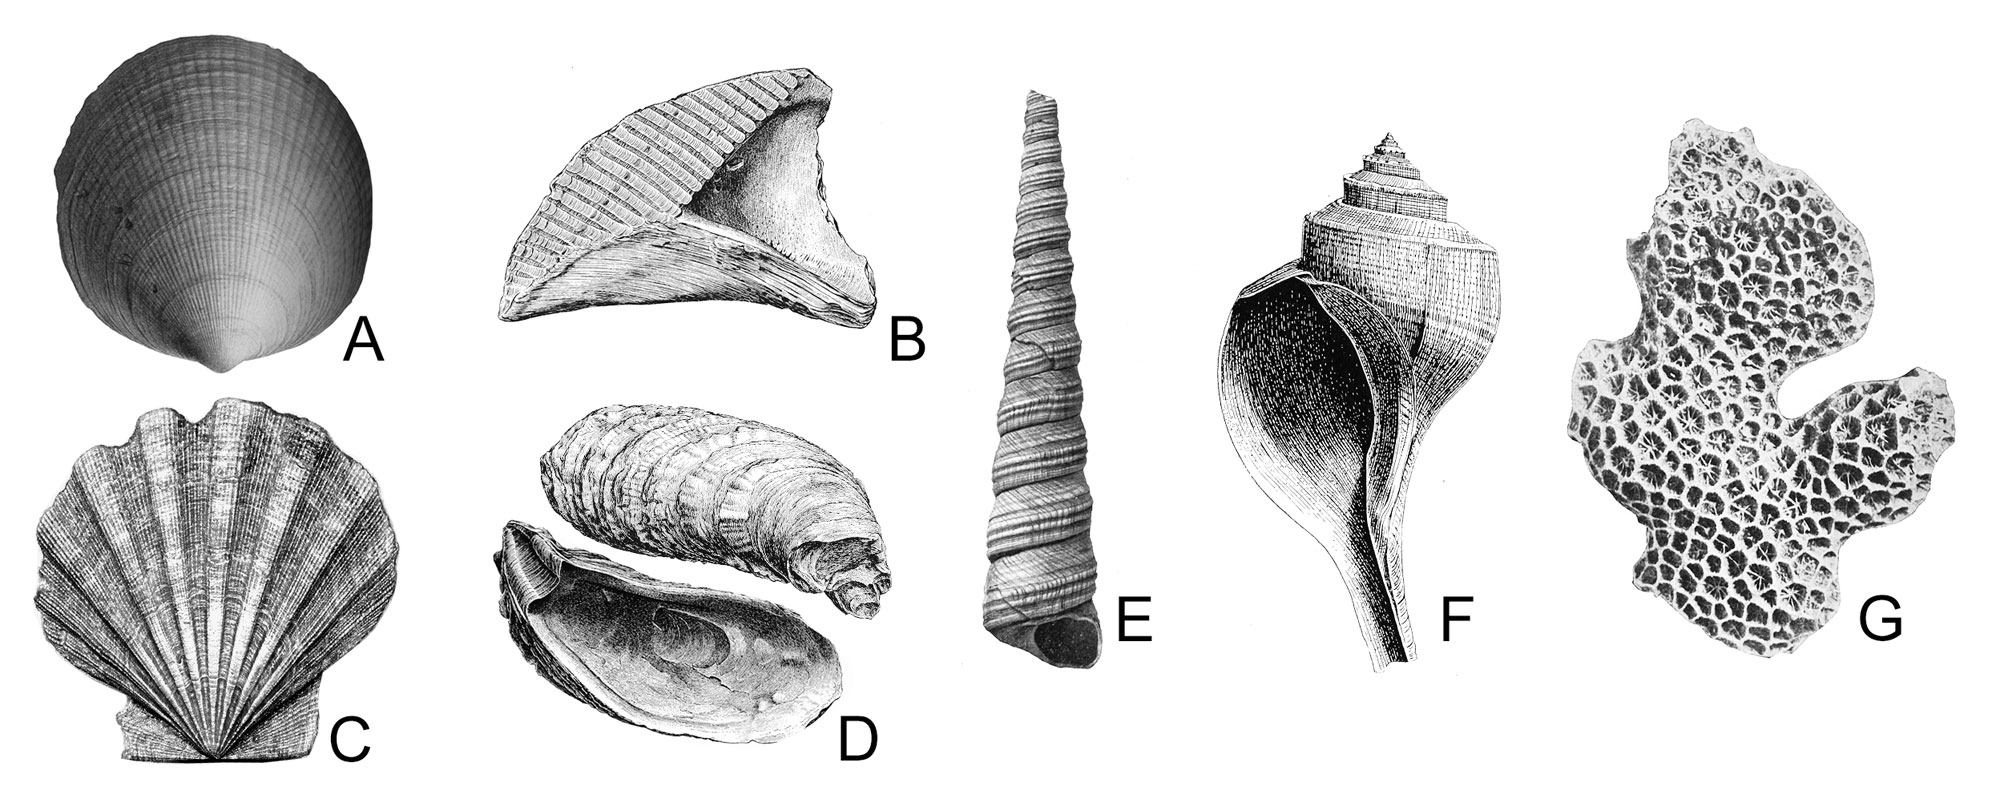 Grayscale figure showing Neogene invertebrates from Virginia and the Carolinas, including four bivalves, two snails, and a coral.